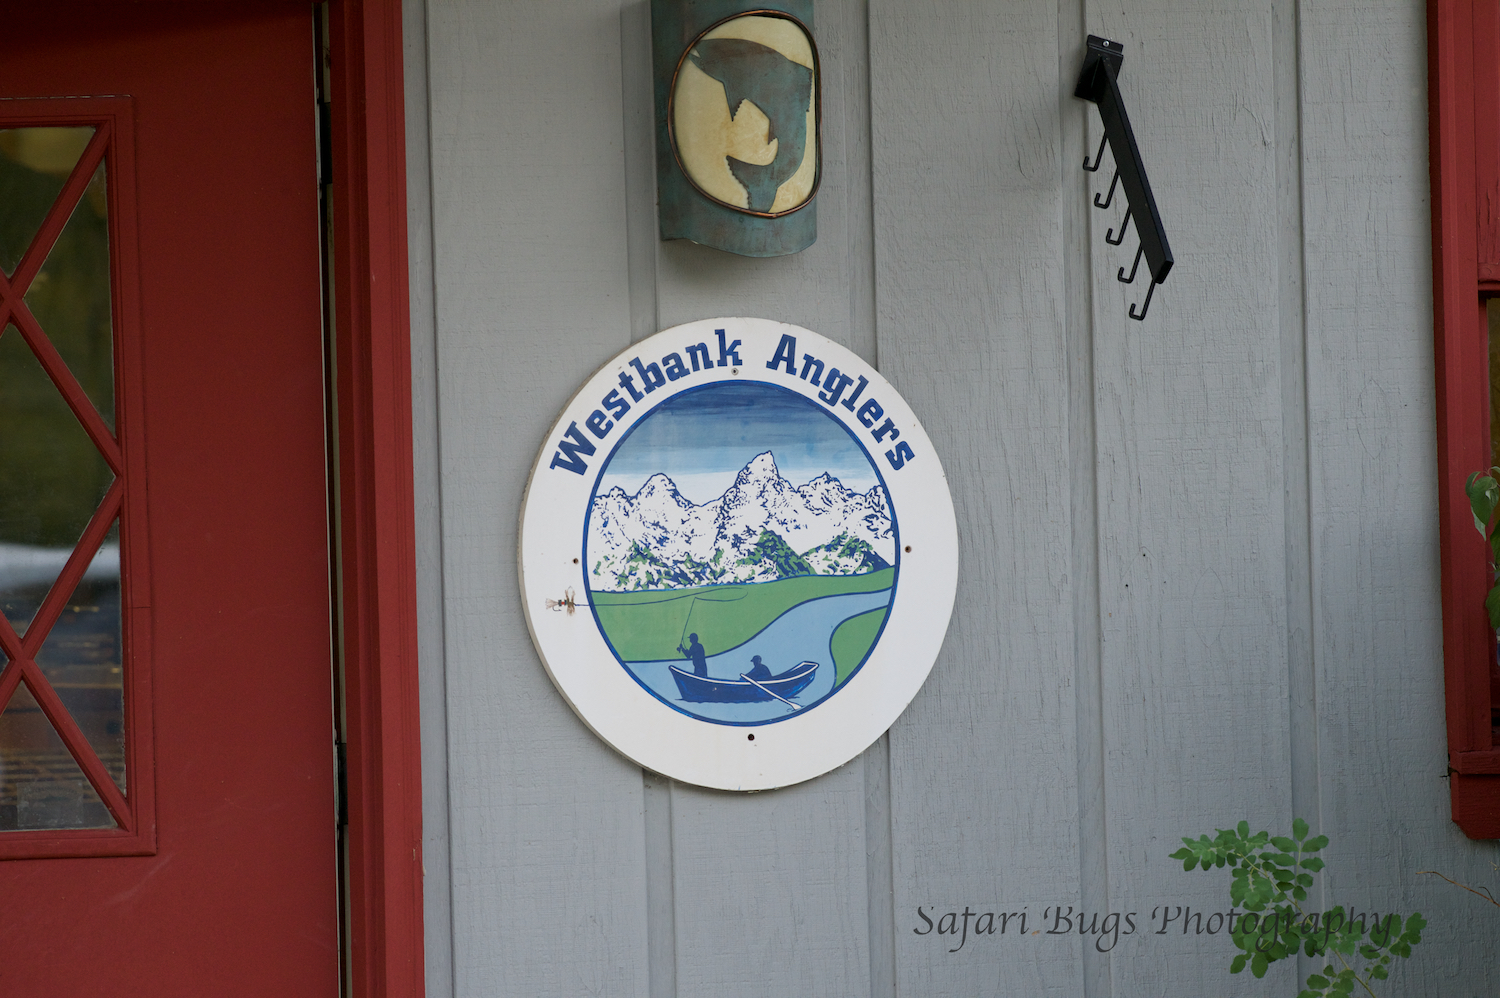  First stop, Westbank Anglers; shop near Teton Village to get our fishing license and to meet our guide. 